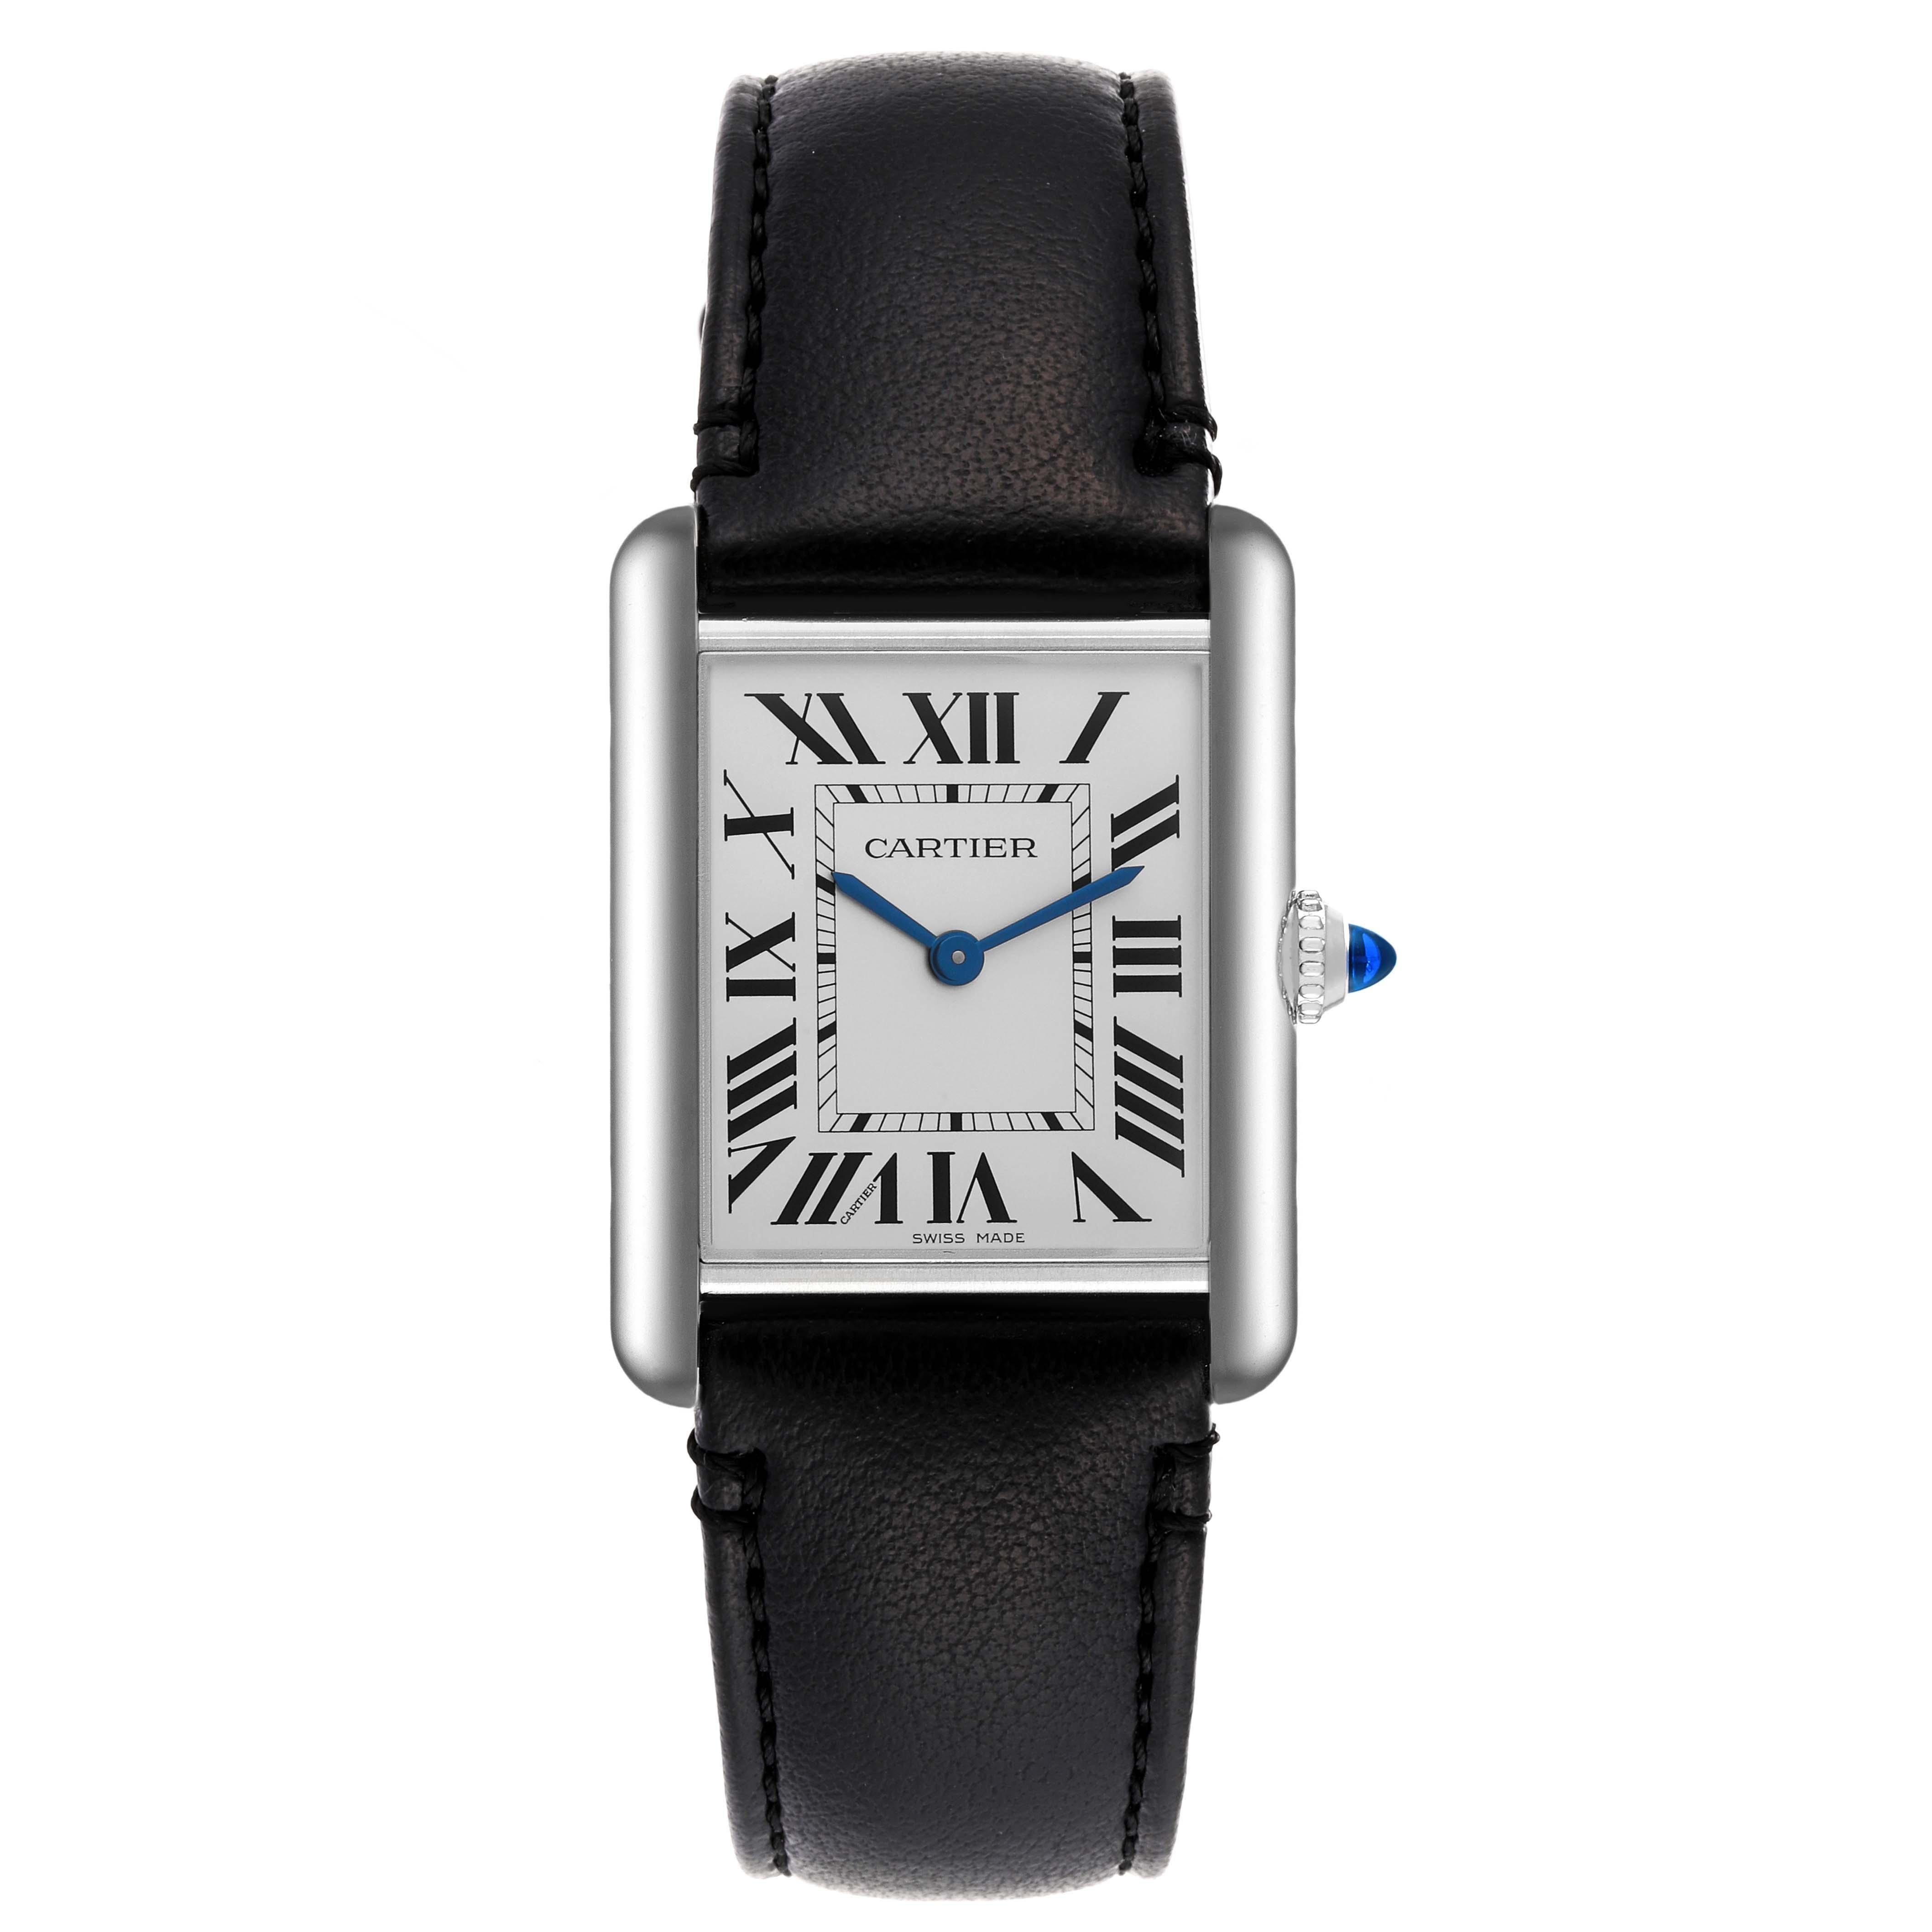 Cartier Tank Must Large SolarBeat Steel Ladies Watch WSTA0059 Box Card. SolarBeat photovoltaic movement. Stainless steel case 33.7 x 25.5 mm. Circular grained crown set with a blue spinel cabochon. . Scratch resistant sapphire crystal. Silvered